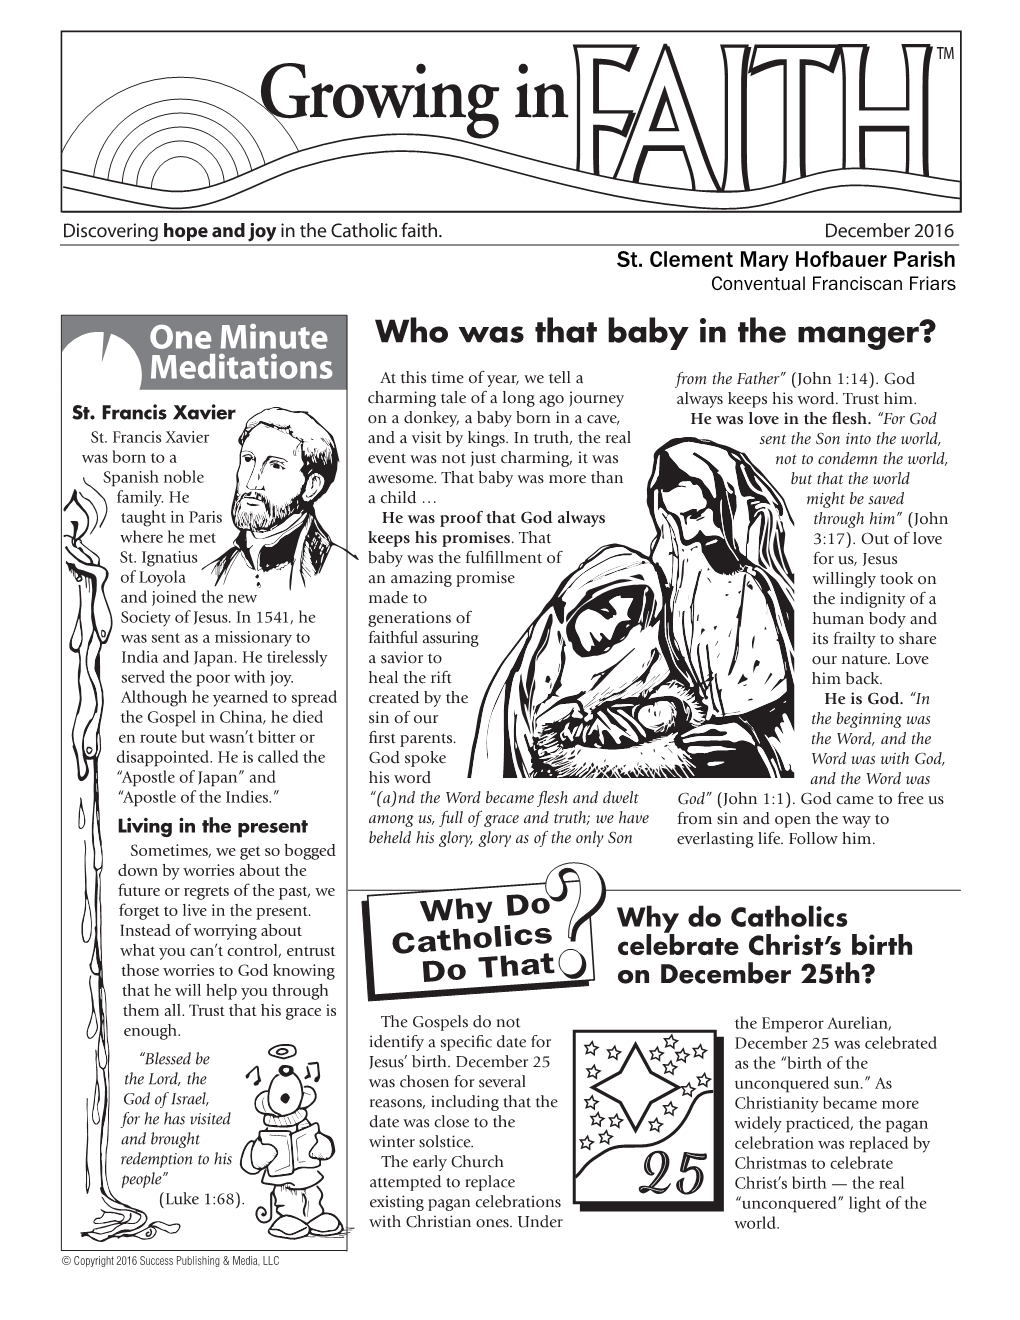 Who Was That Baby in the Manger?